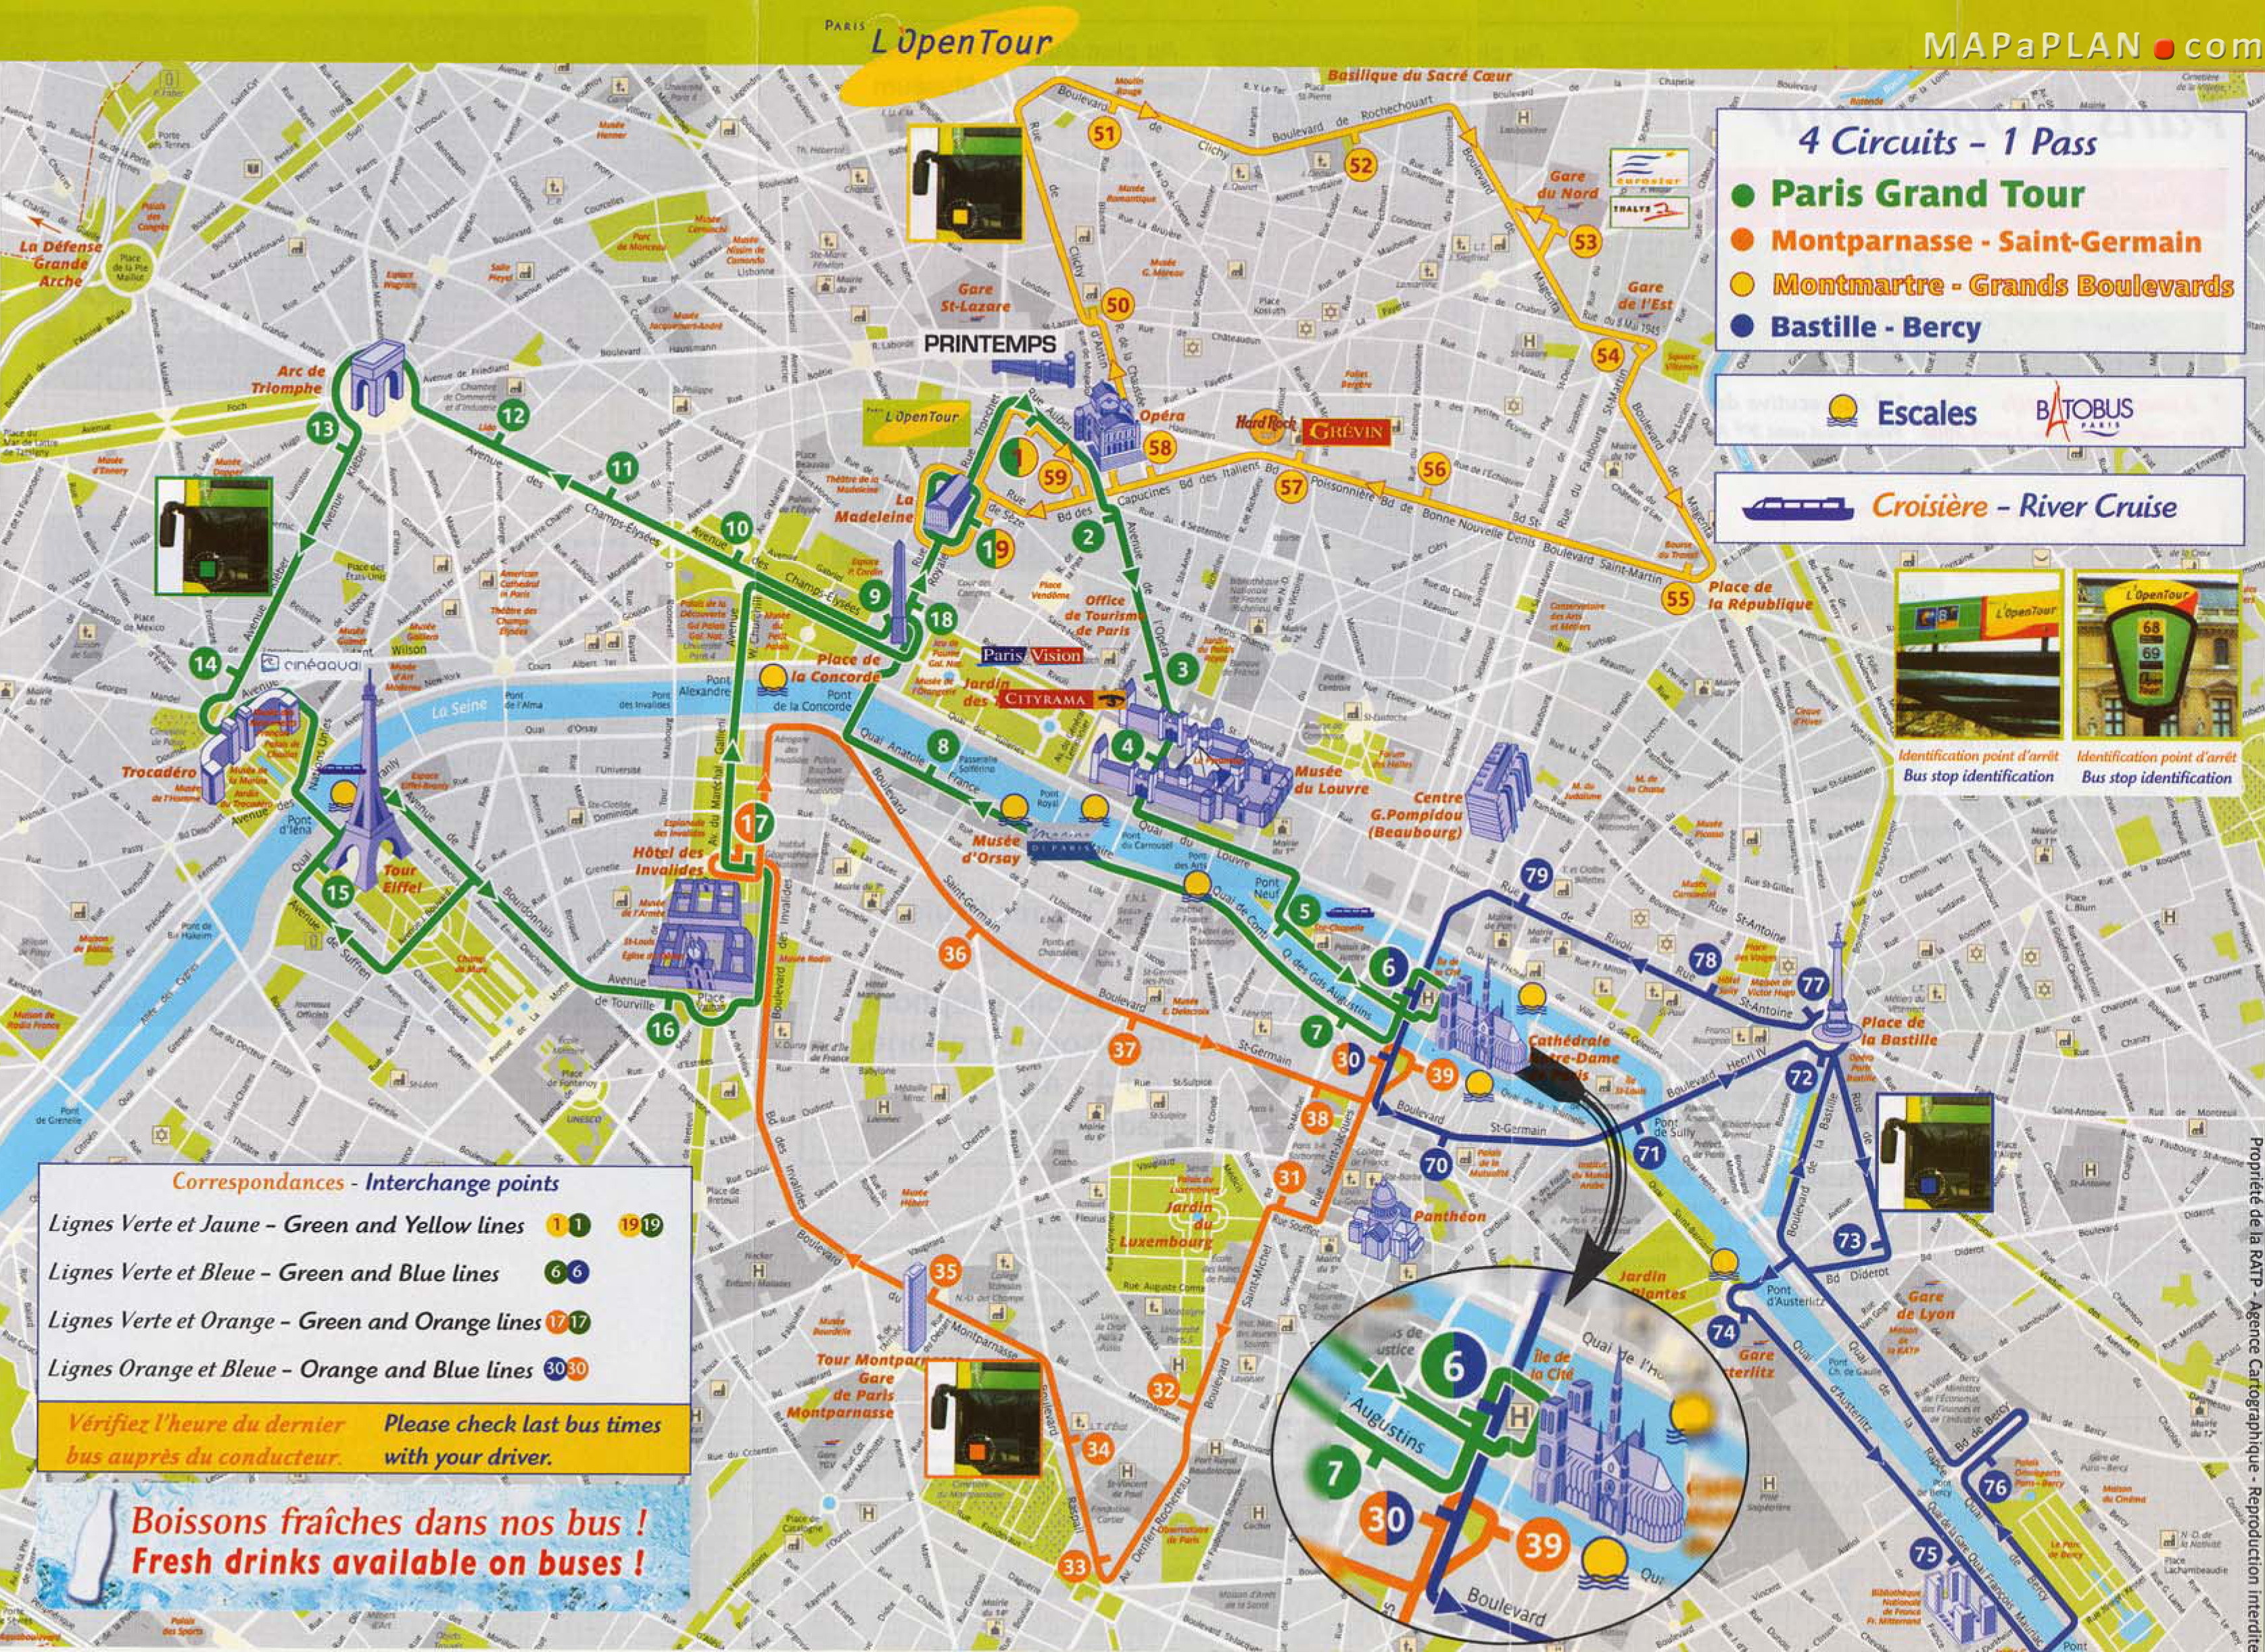 Paris top tourist attractions map Best of Paris one day trip sights